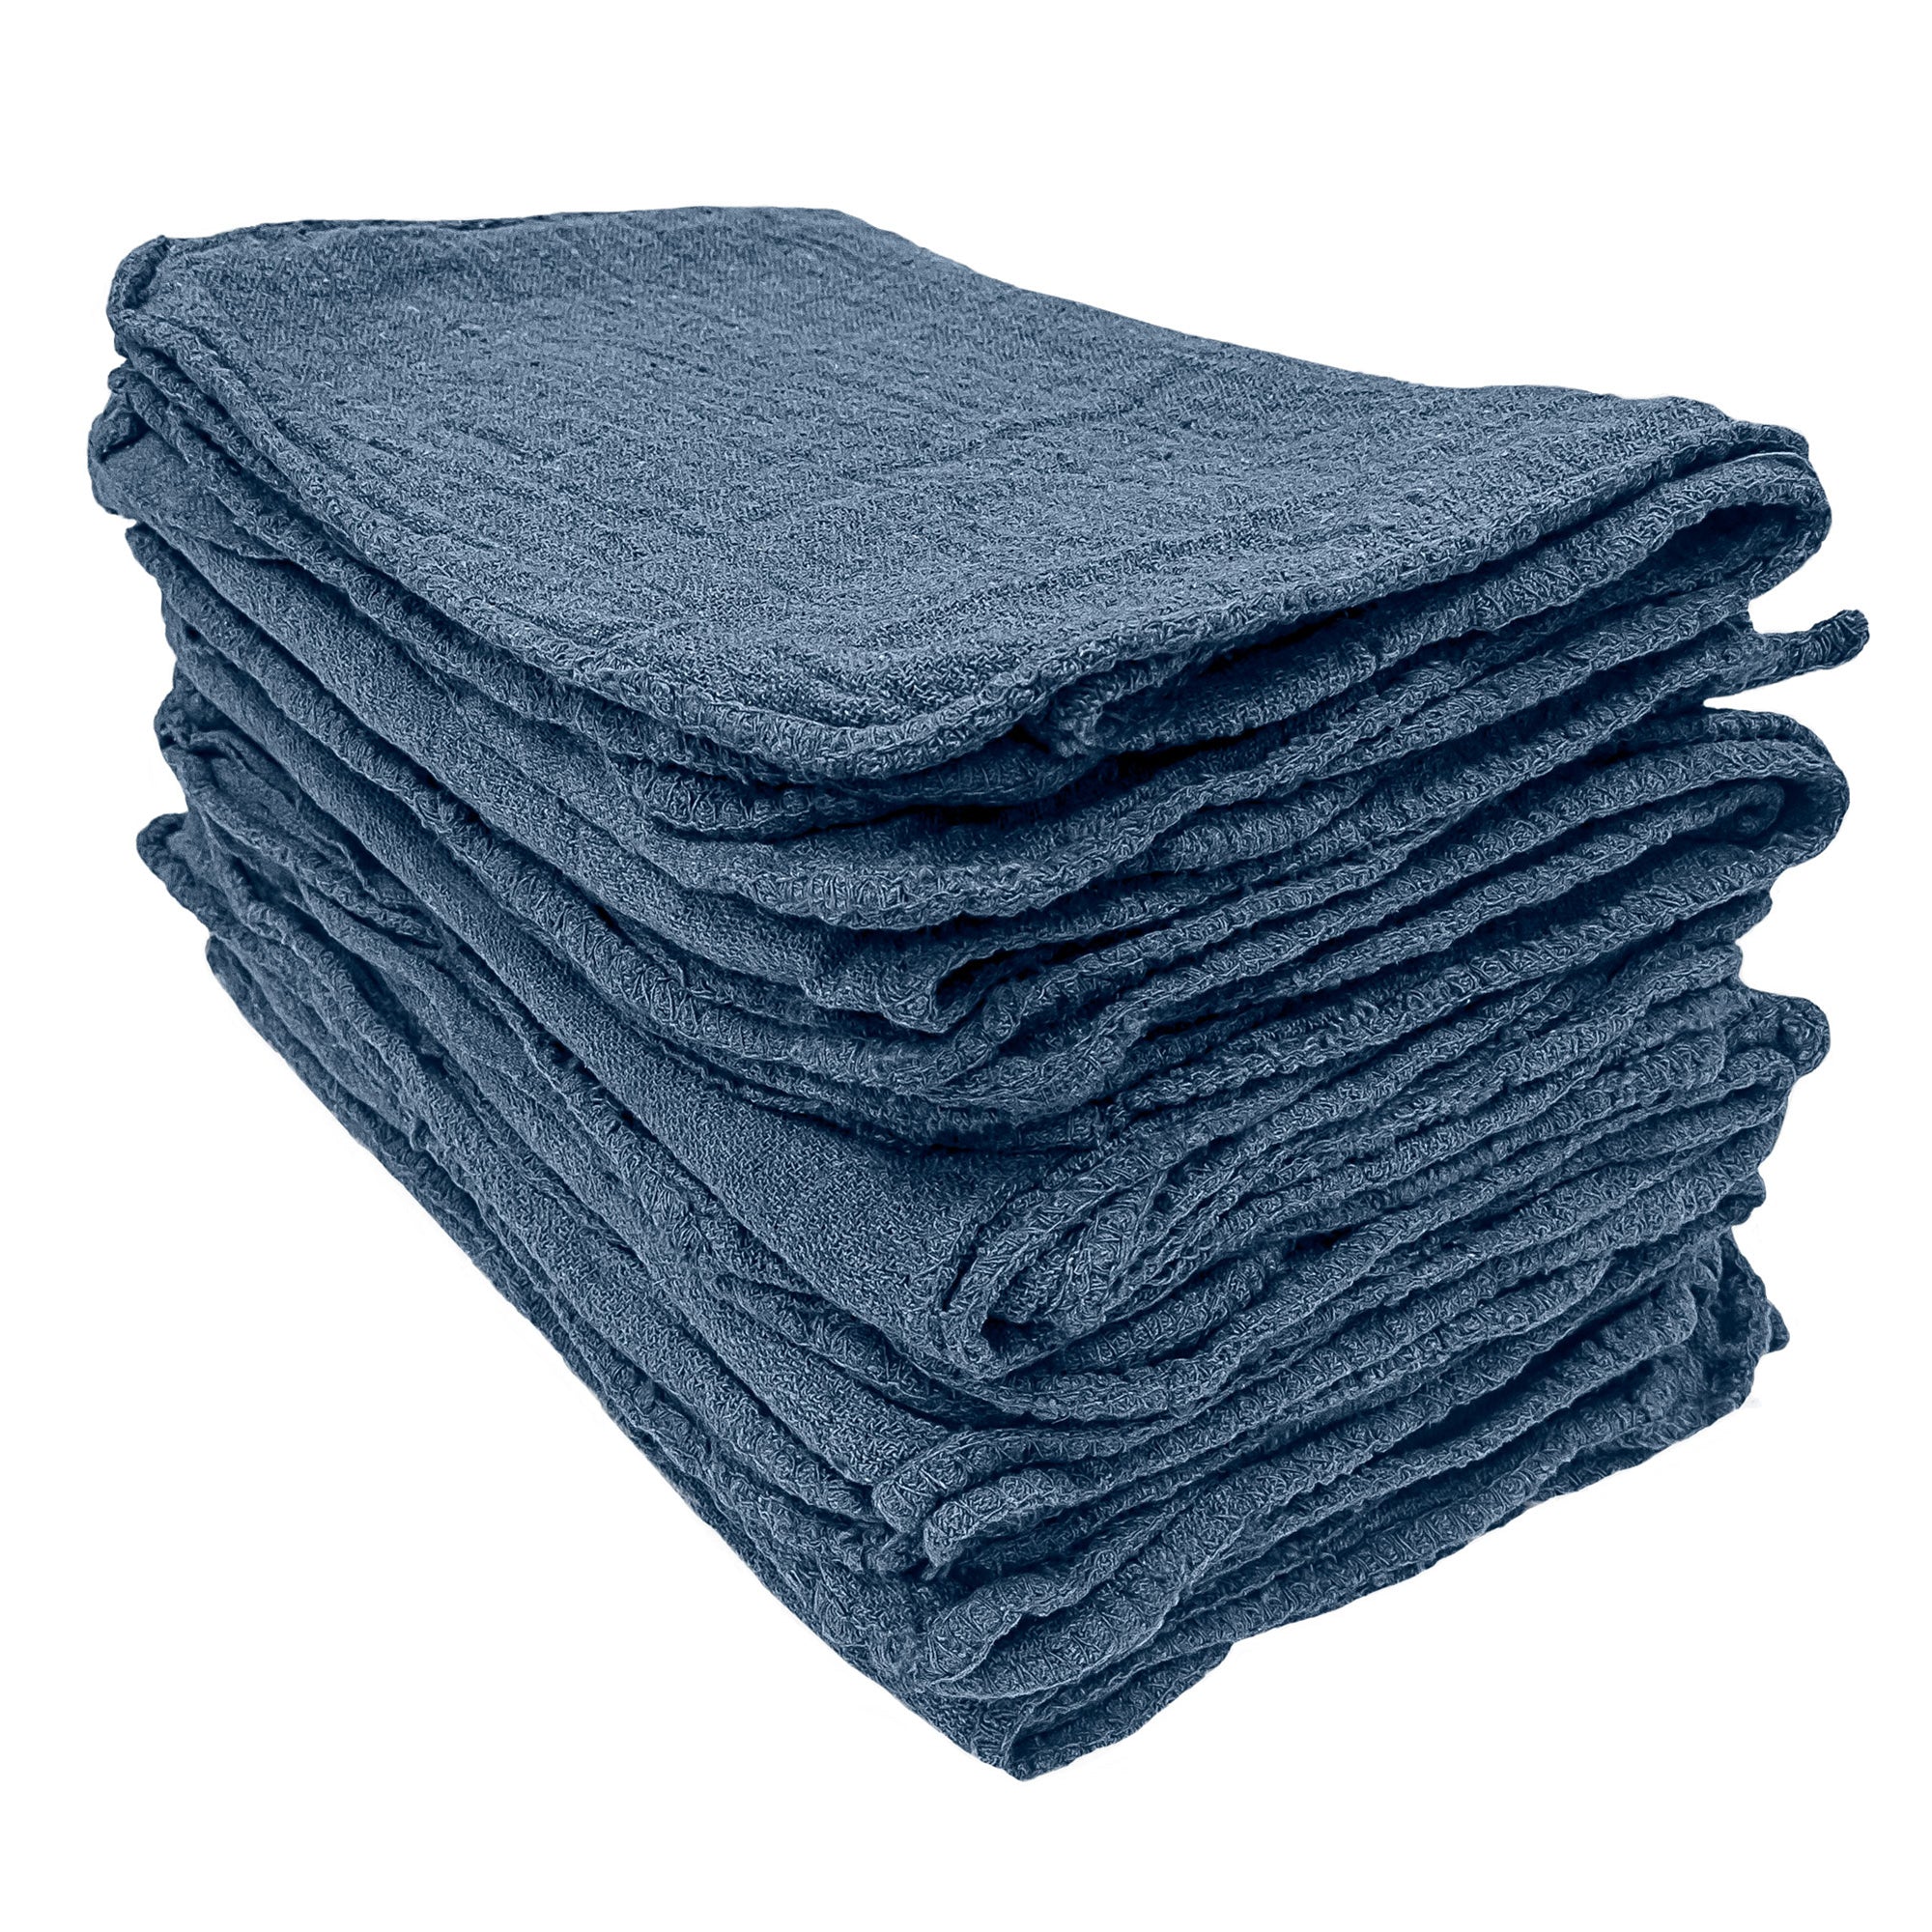 Car Wash 100% Cotton Terry Cloth Cleaning Drying Towels 16 x 25